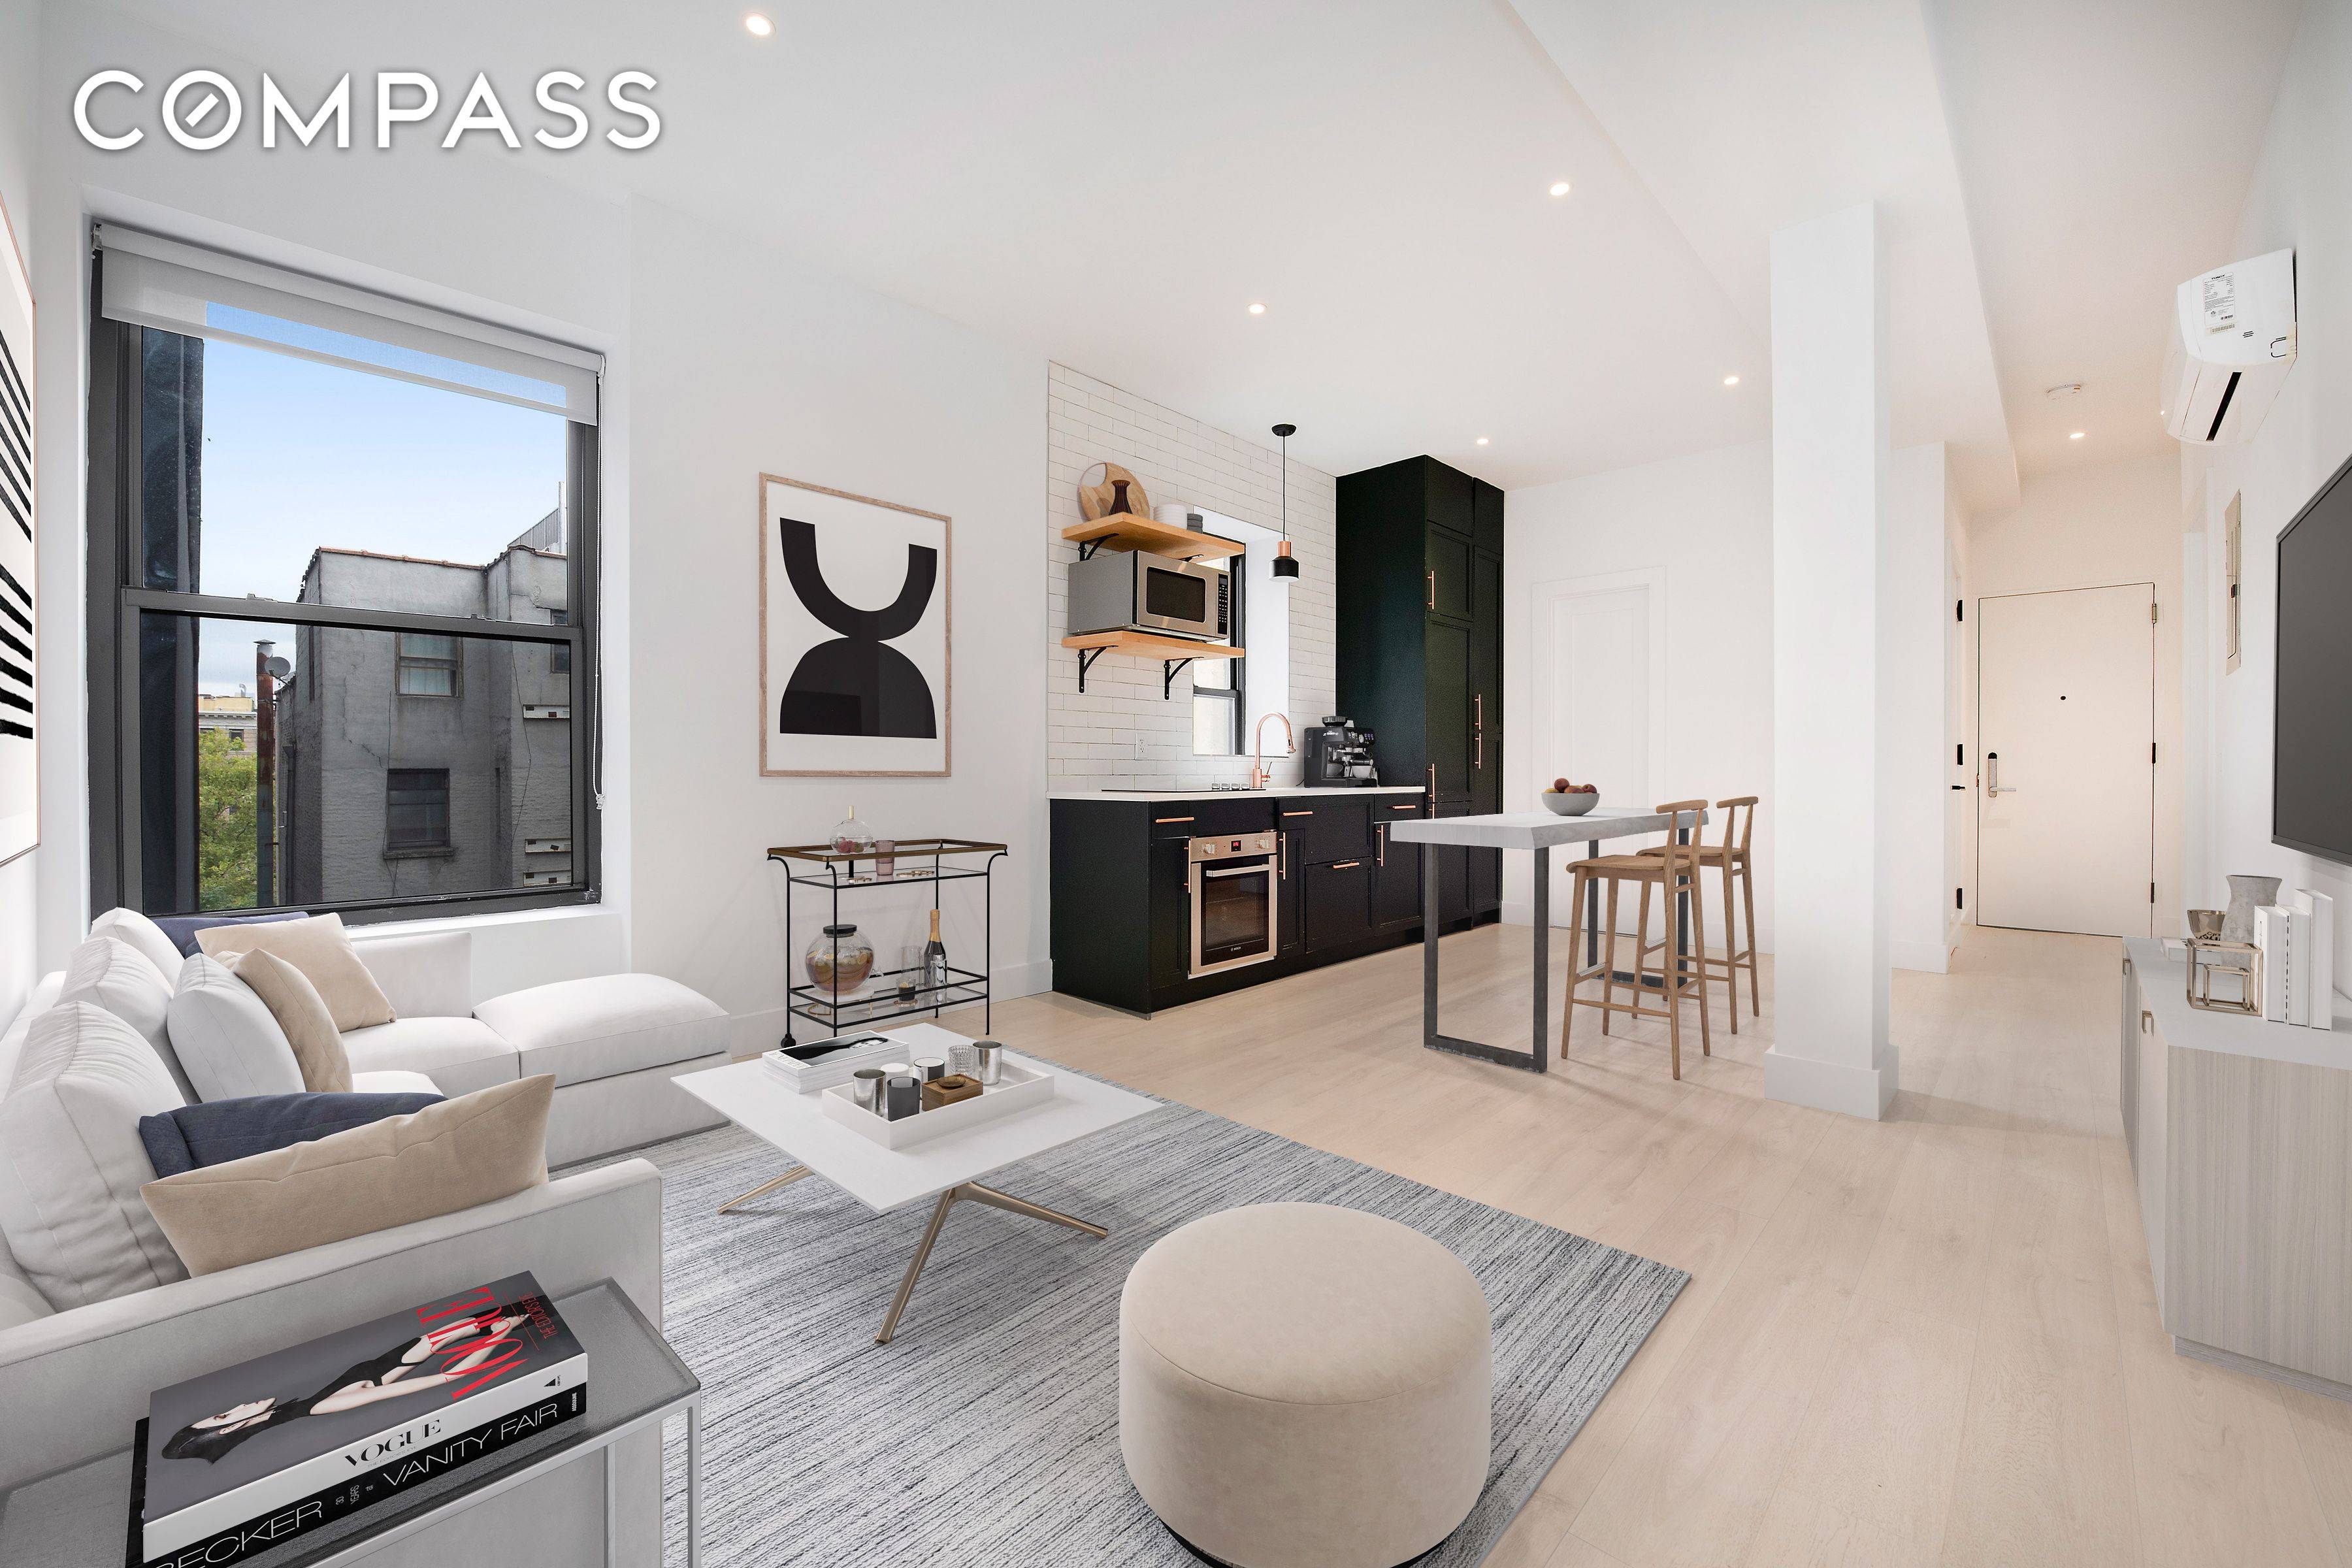 Welcome to 245 Eldridge Street, a fully re developed boutique building at the nexus of Houston and Eldridge and all of Lower East Side s main attractions.